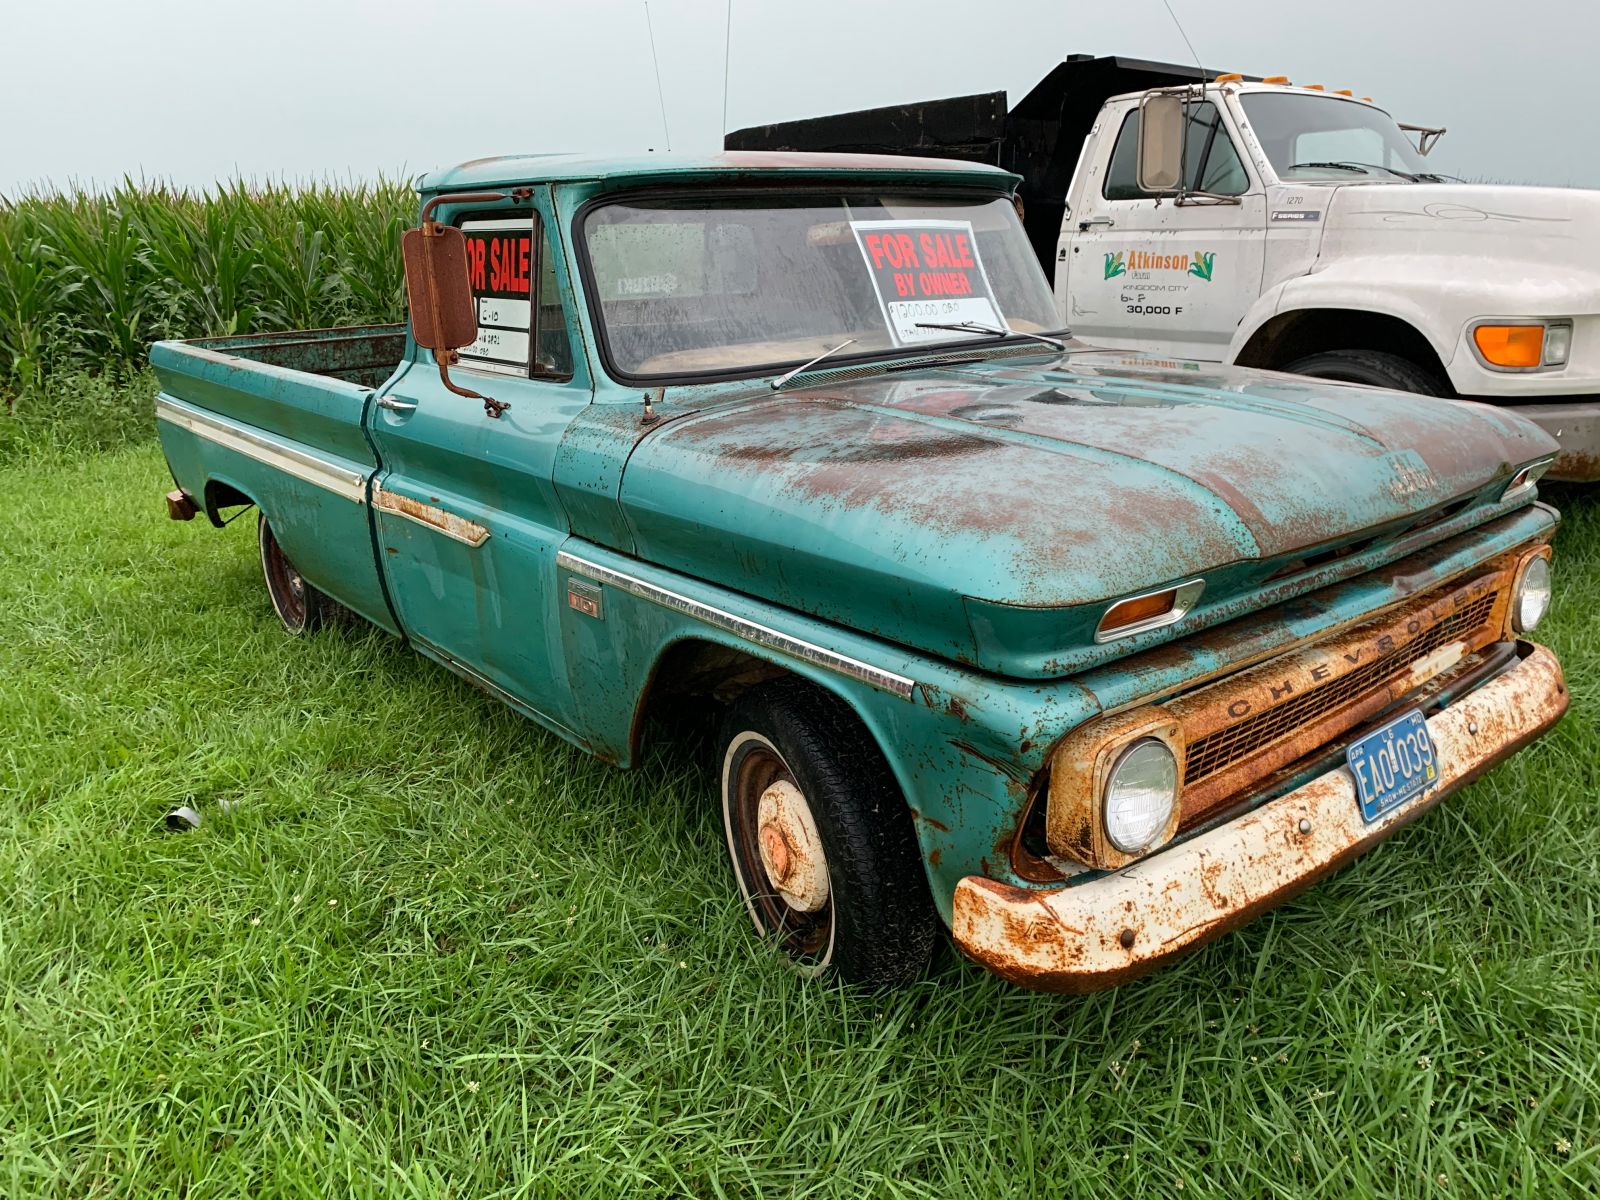 Illustration for article titled Barn Find the guy tells me. 66 C10 Longbed Also help guess years for other cars.